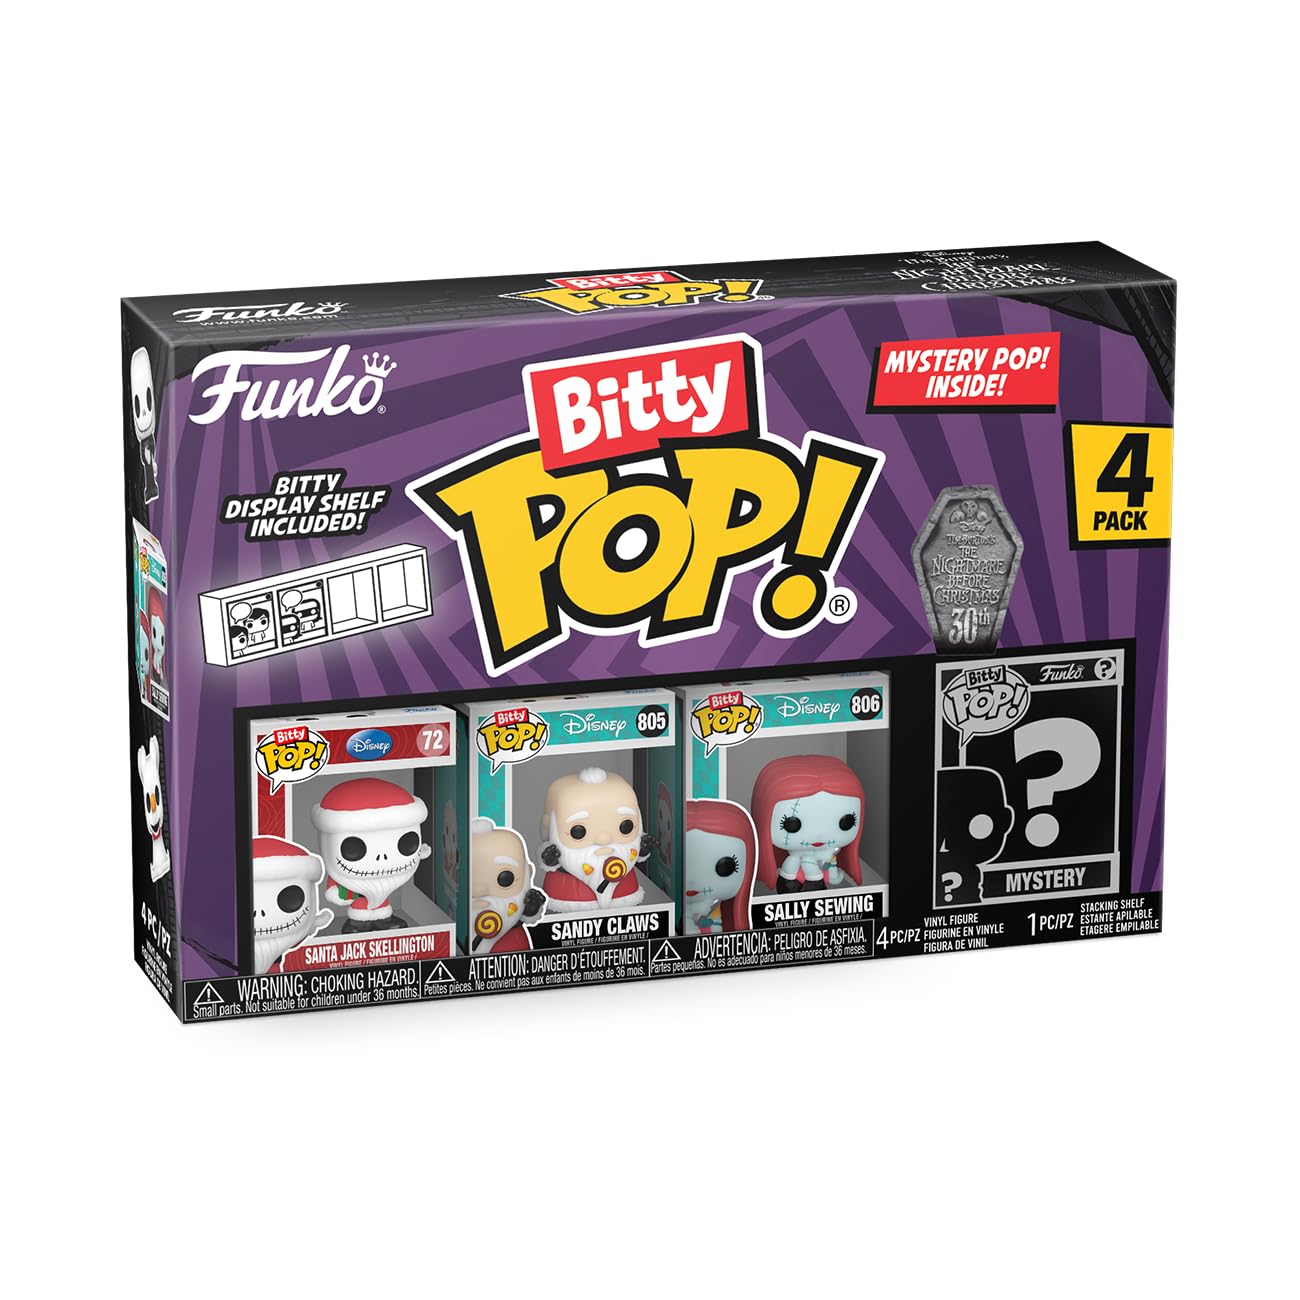 Funko Bitty Pop! The Nightmare Before Christmas Mini Collectible Toys 4-Pack - Santa Jack, Sandy Claws, Vampire Teddy with Duck & Mystery Chase Figure (Styles May Vary) - amzGamess